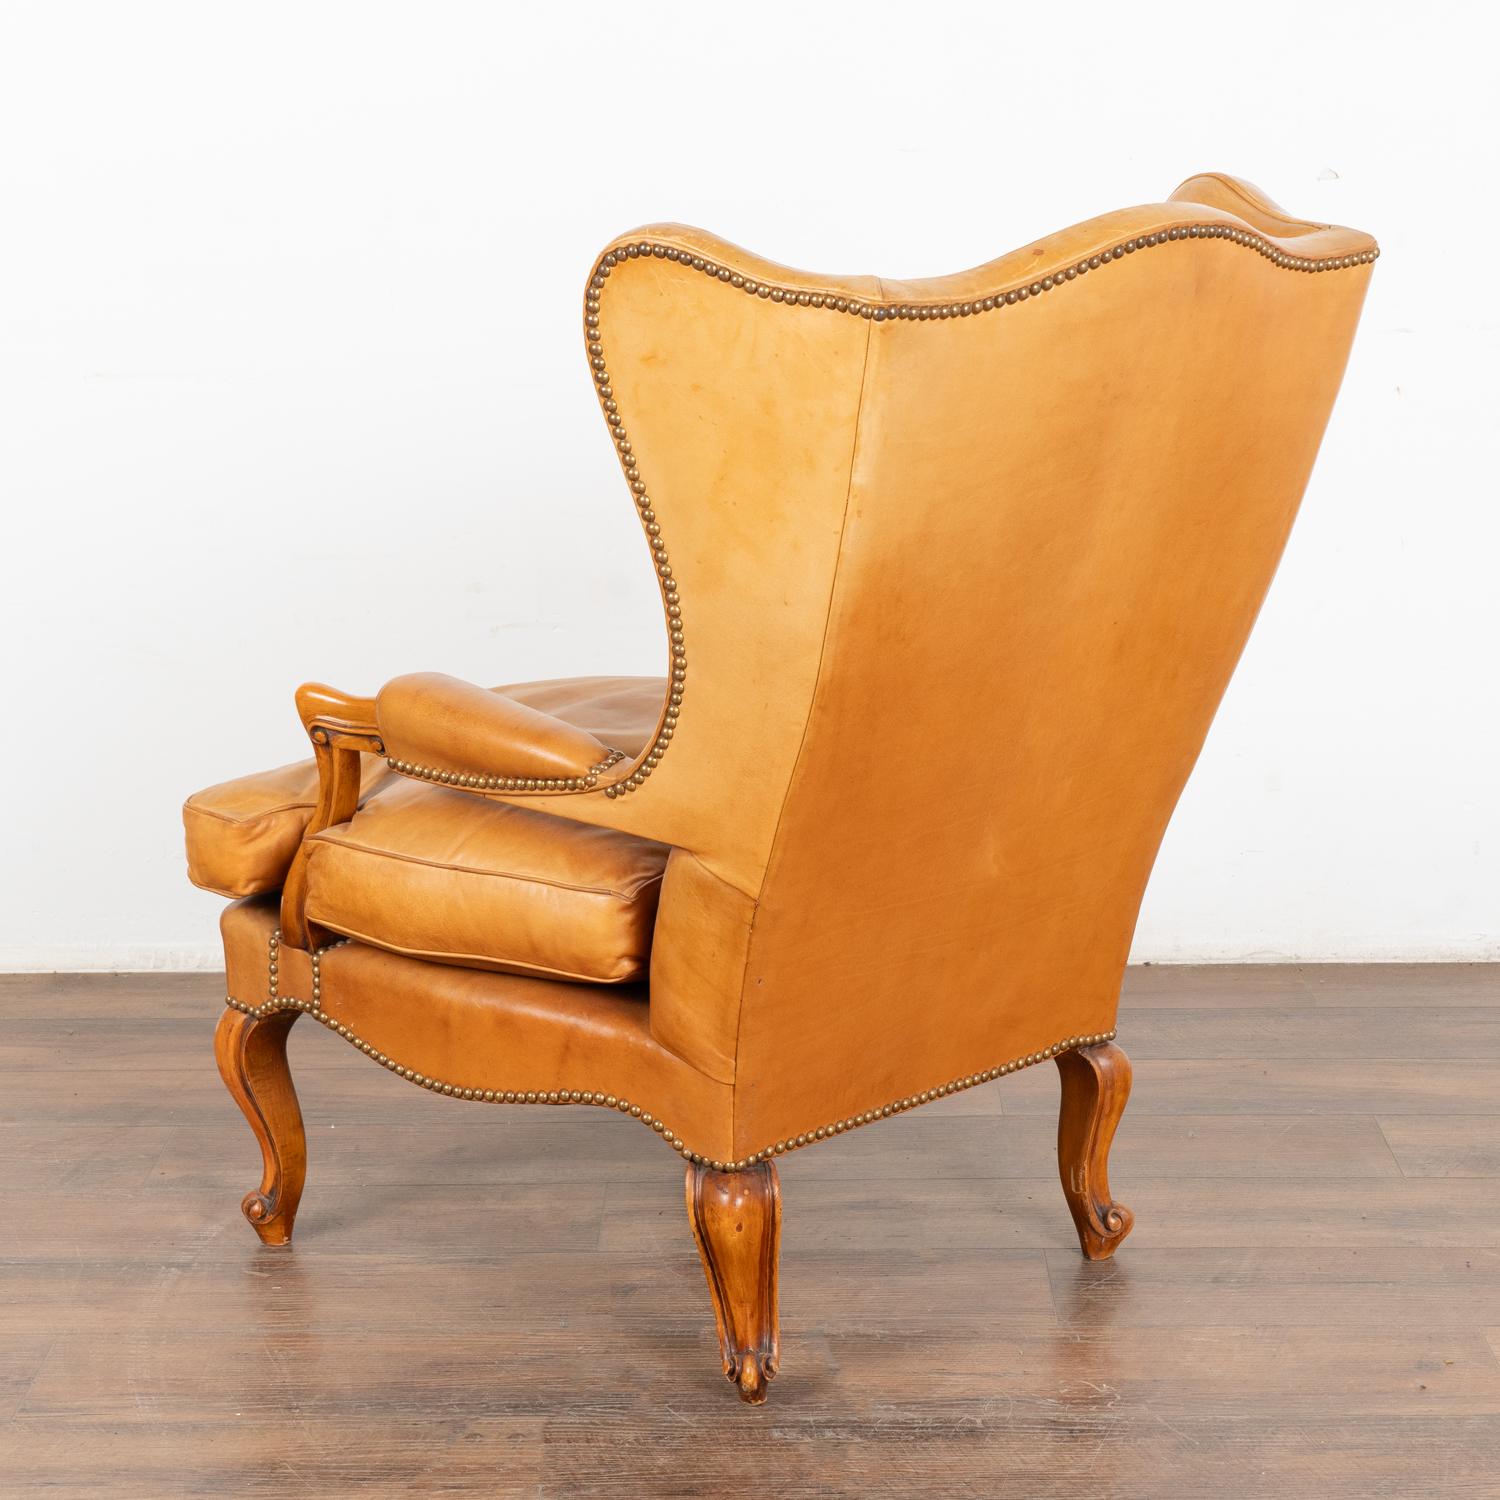 Vintage Camel Colored Leather Wingback Armchair, Denmark circa 1940 For Sale 5